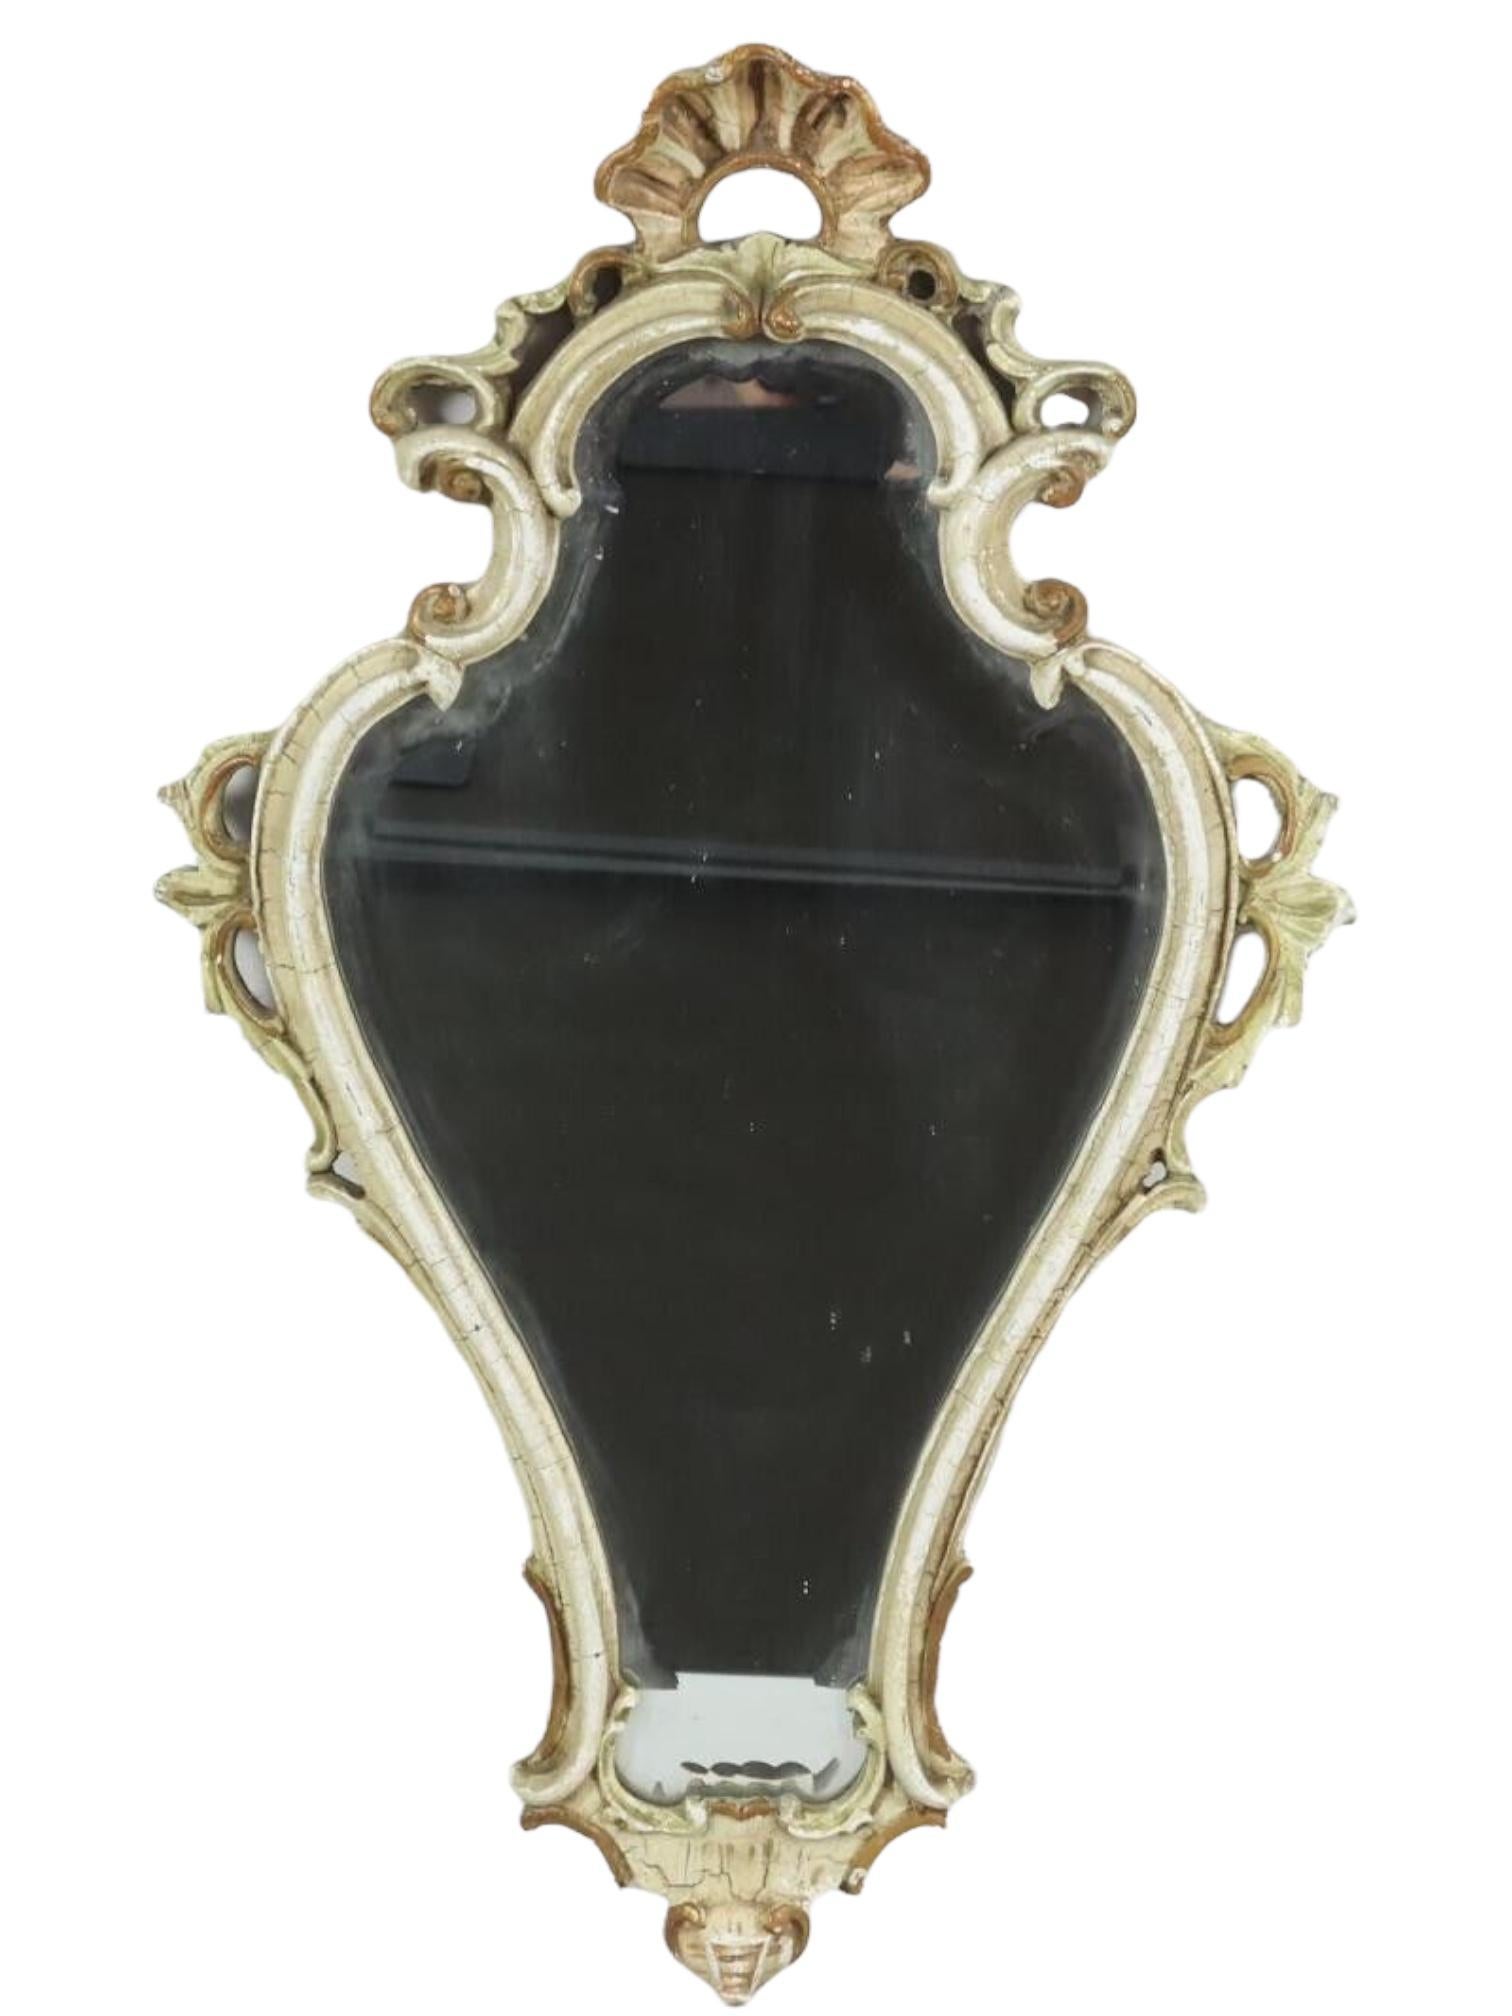 Stunning toleware mirror. The gilded and white frame surrounds a glass mirror. Made in Germany, circa 19th Century. Frame has craquelure and slight loss of paint in places, but this is old-age. 
Beautiful mirror for any room or your hall entry.